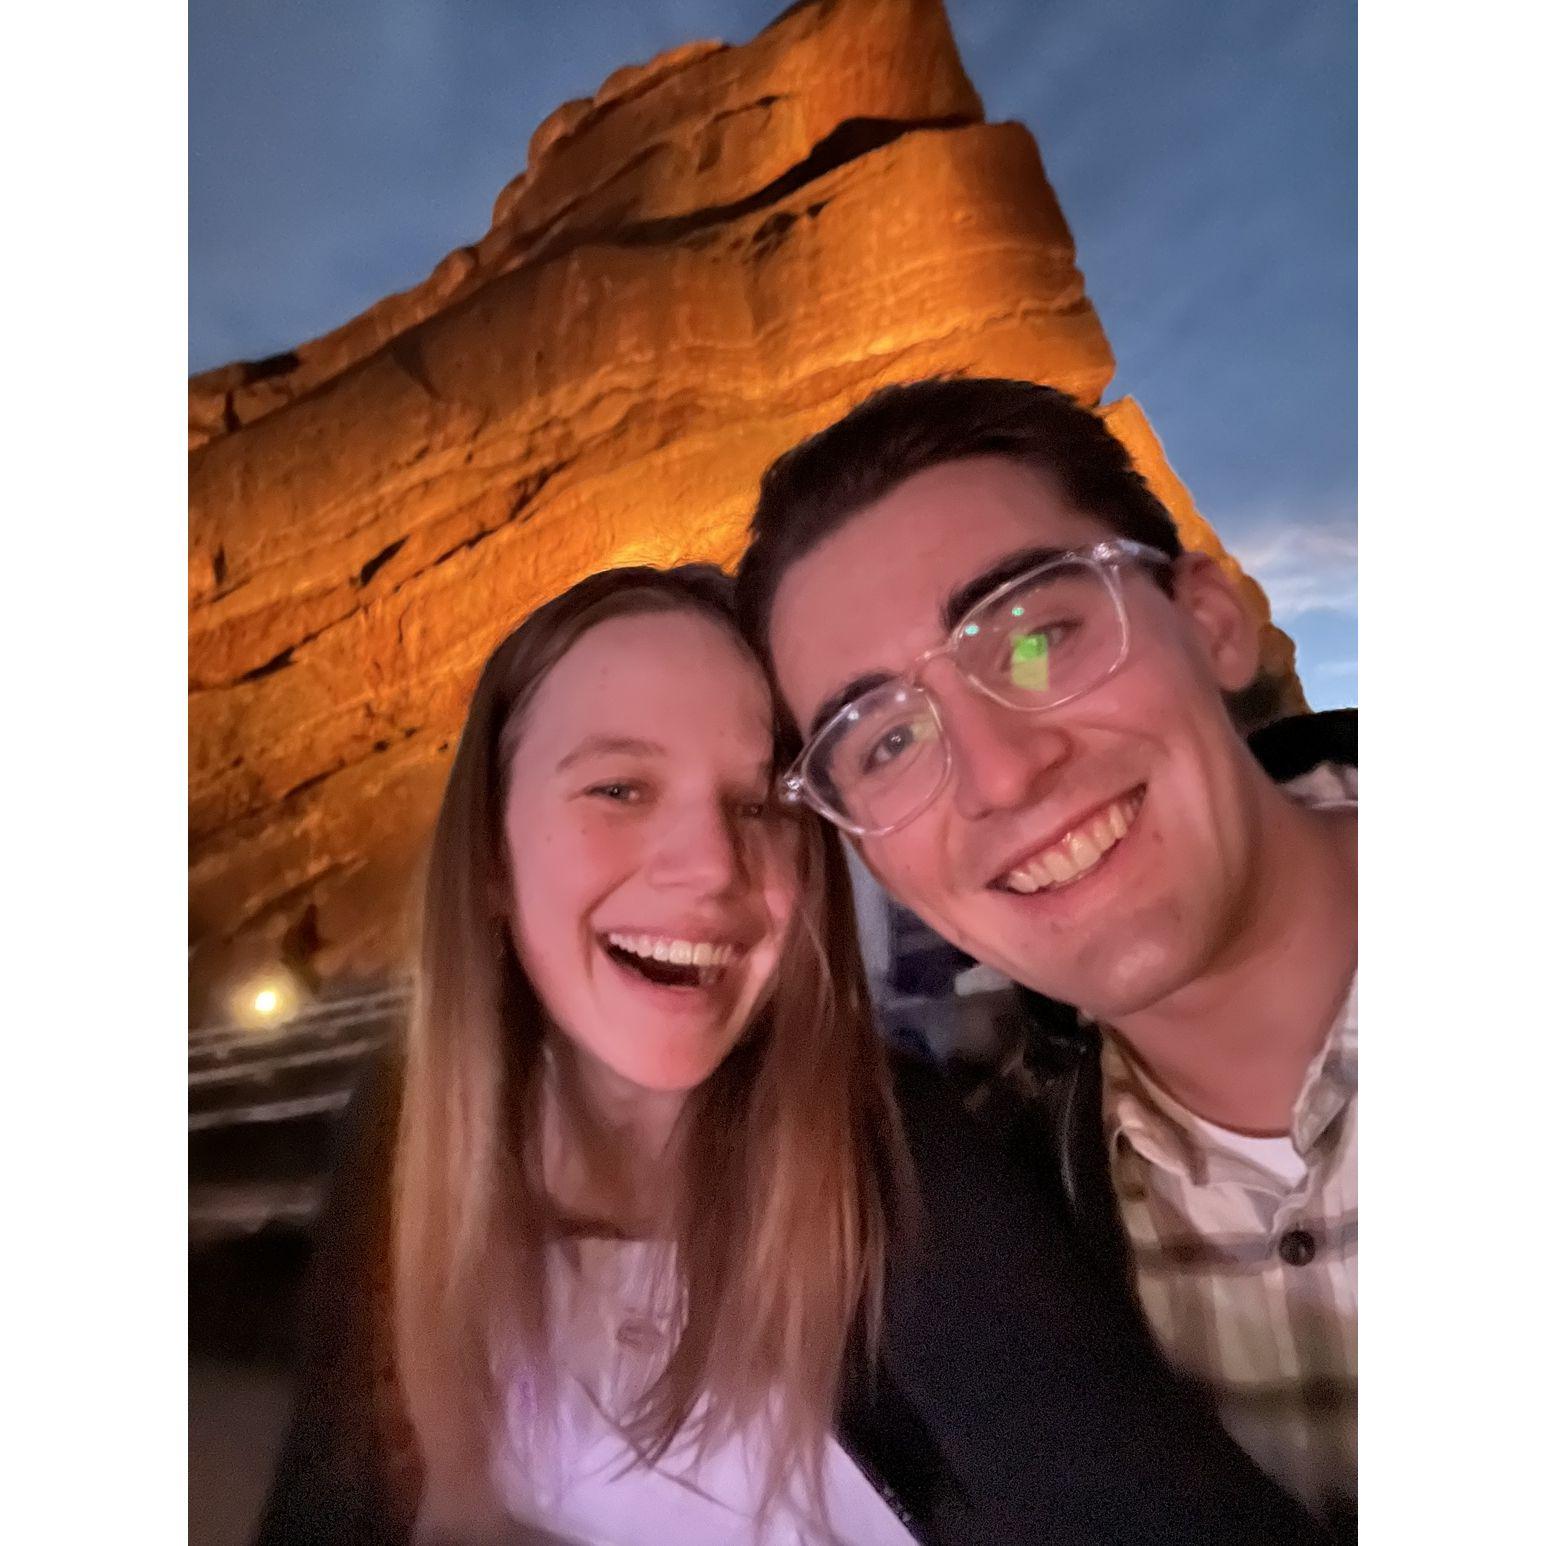 First concert together! Caamp at Red Rocks! October 4, 2022.